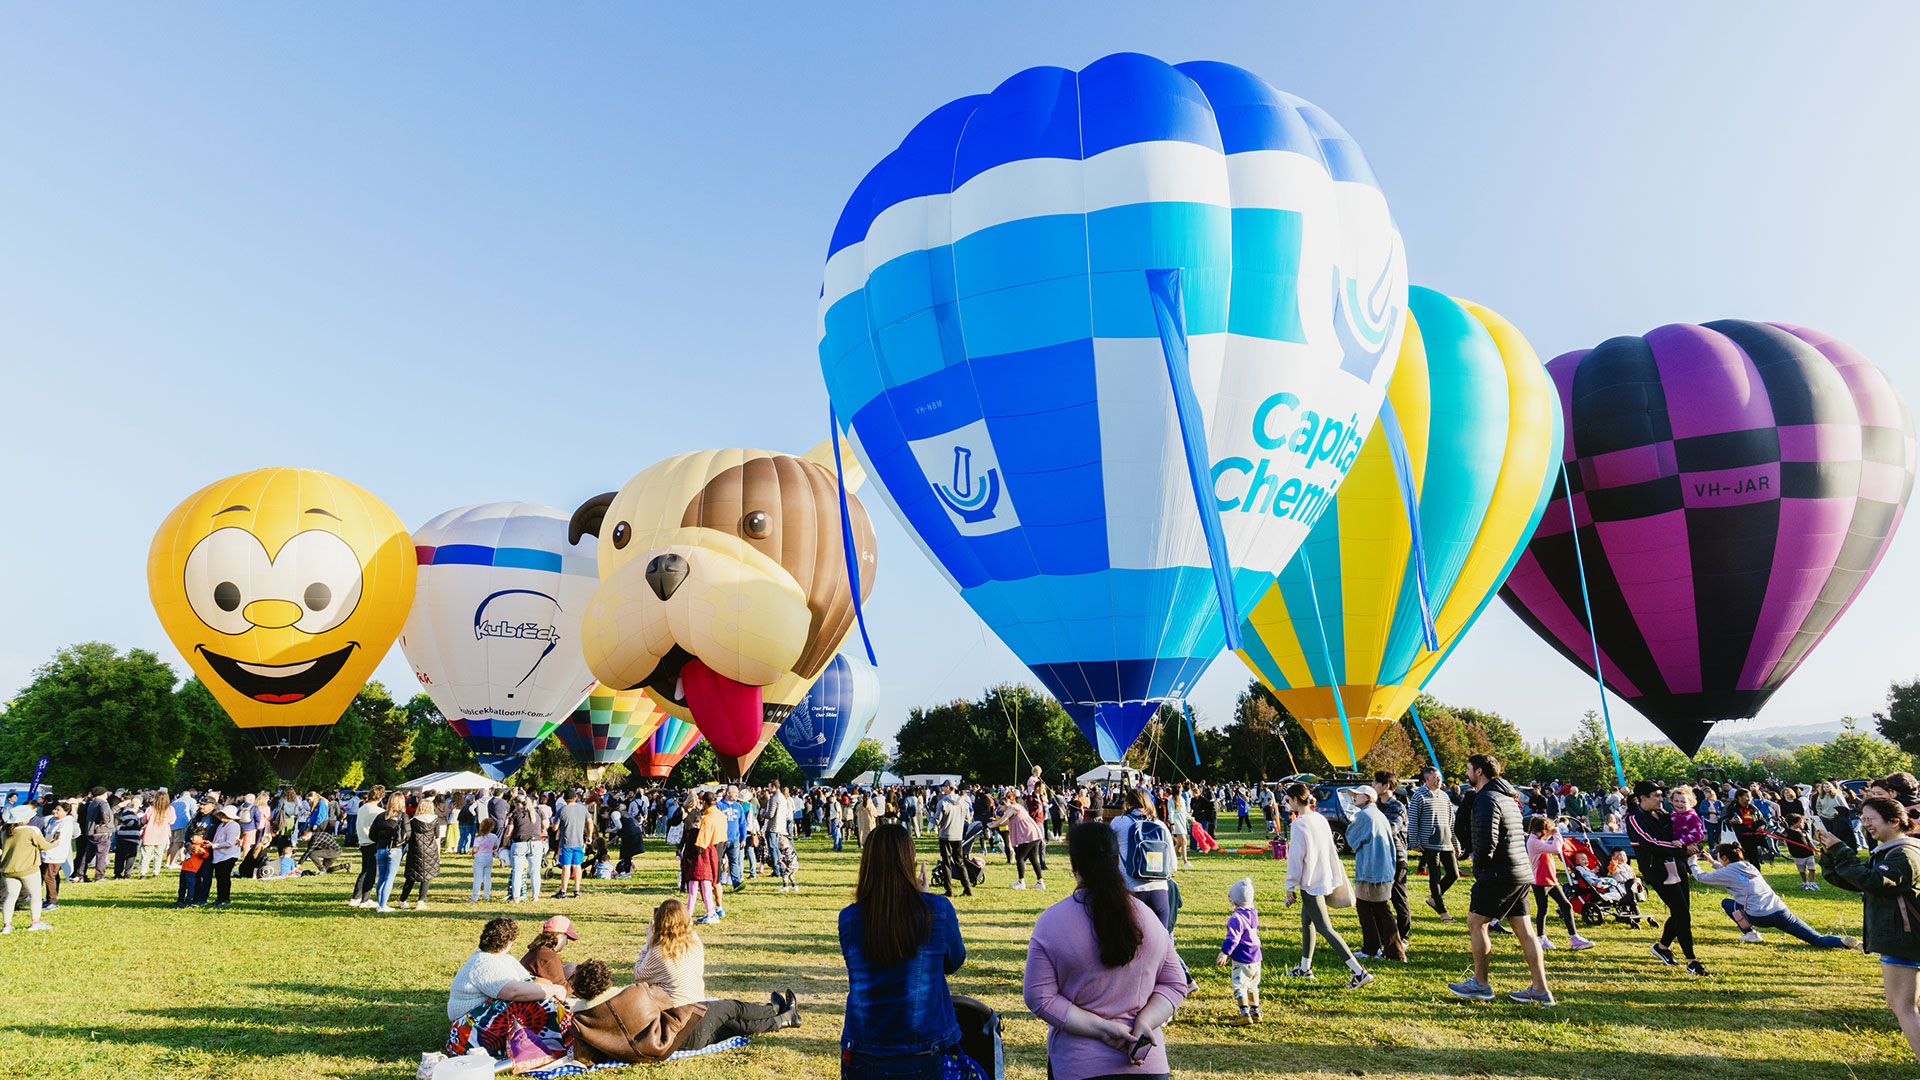 A crowd of people watch colourful hot air balloons which have inflated but are still sitting on the grass.